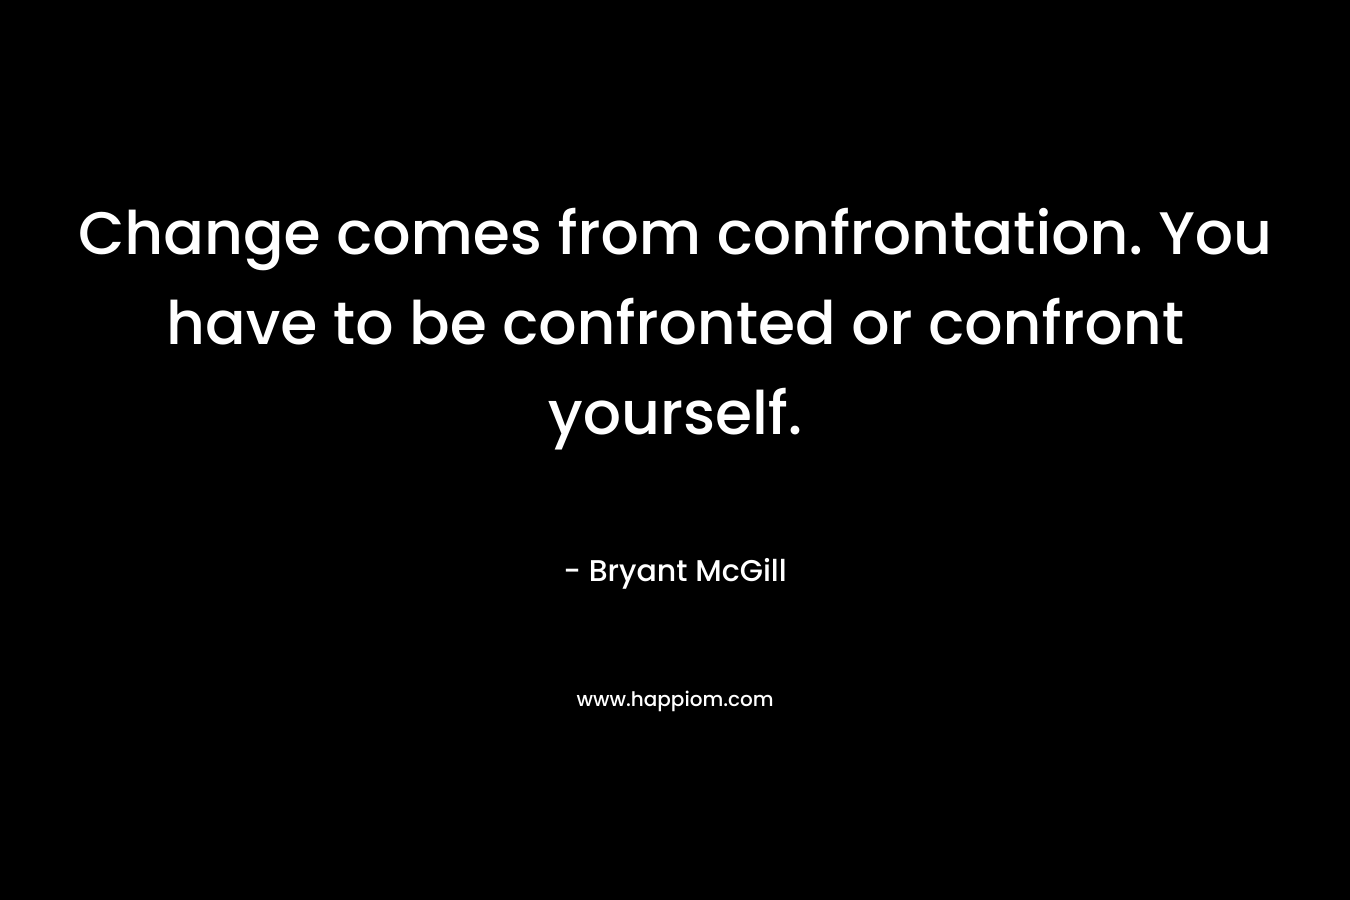 Change comes from confrontation. You have to be confronted or confront yourself.